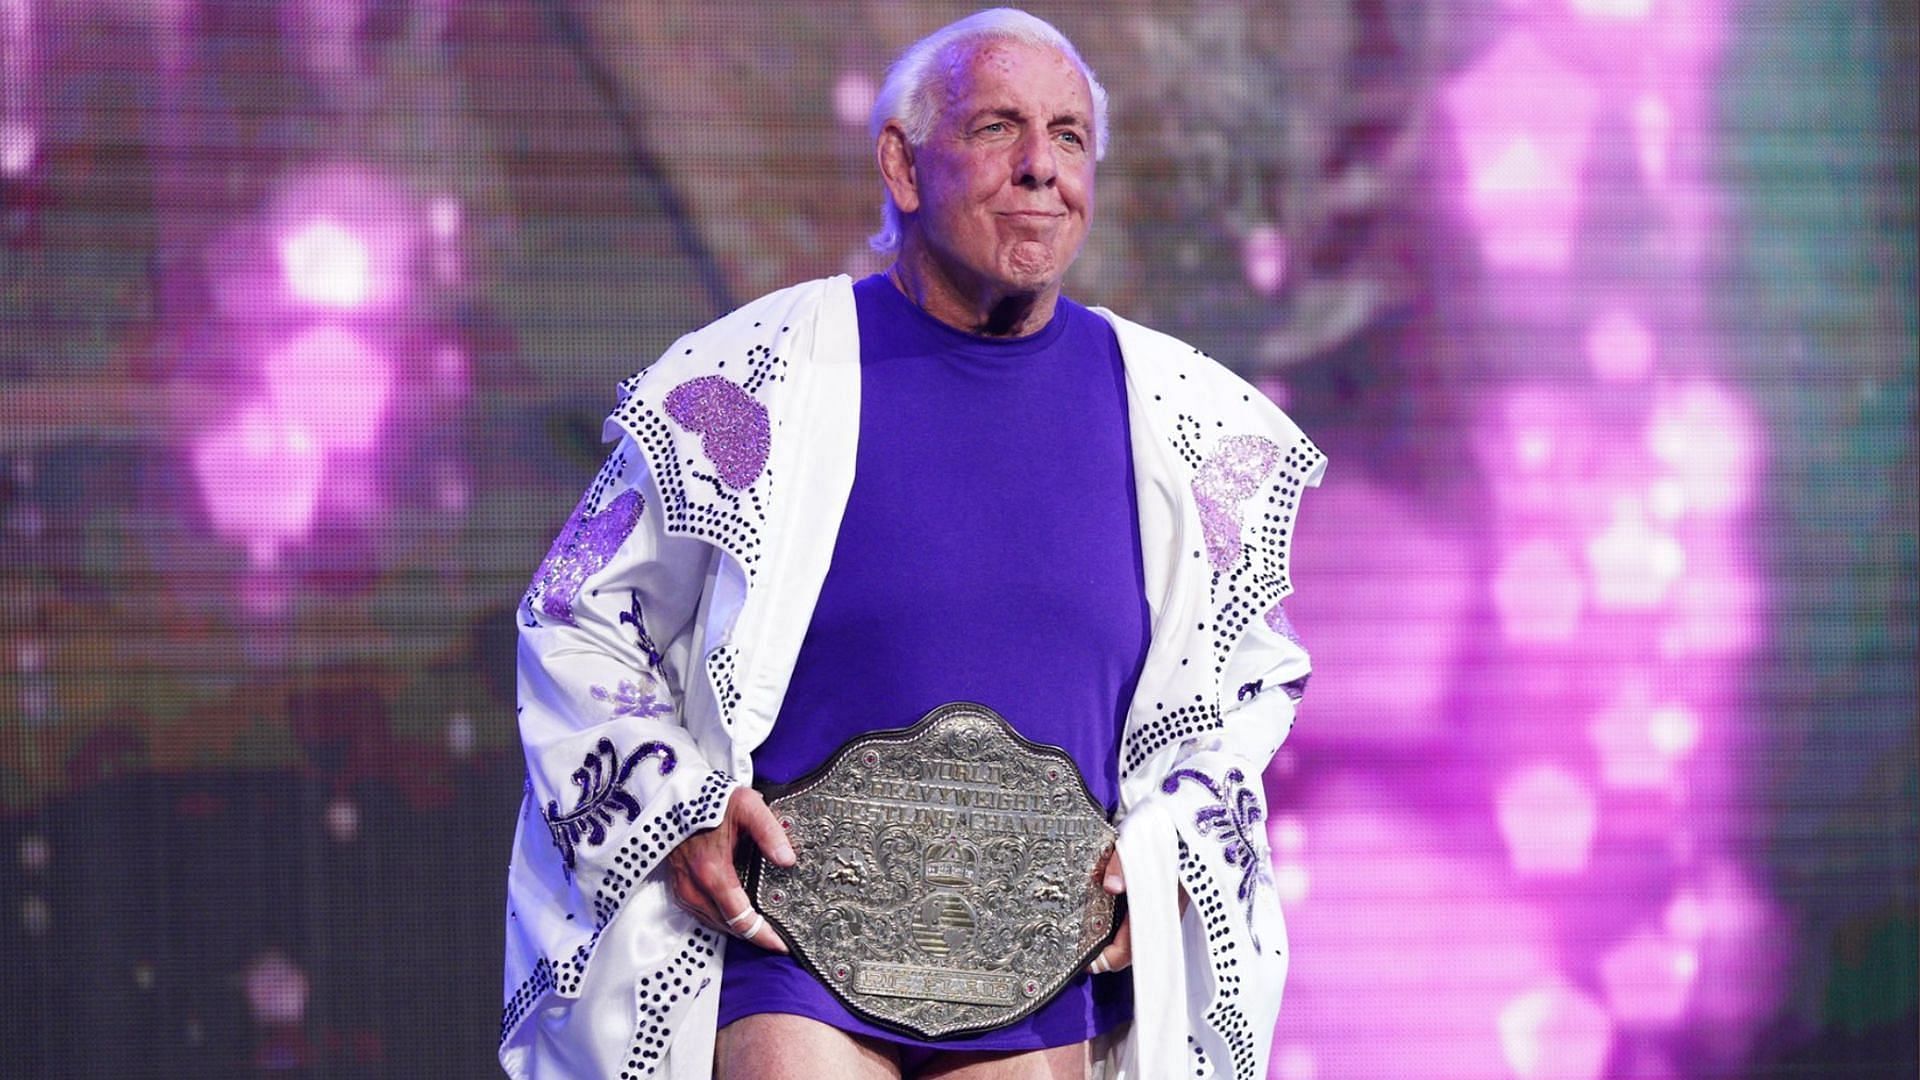 Ric Flair walking out for his last match